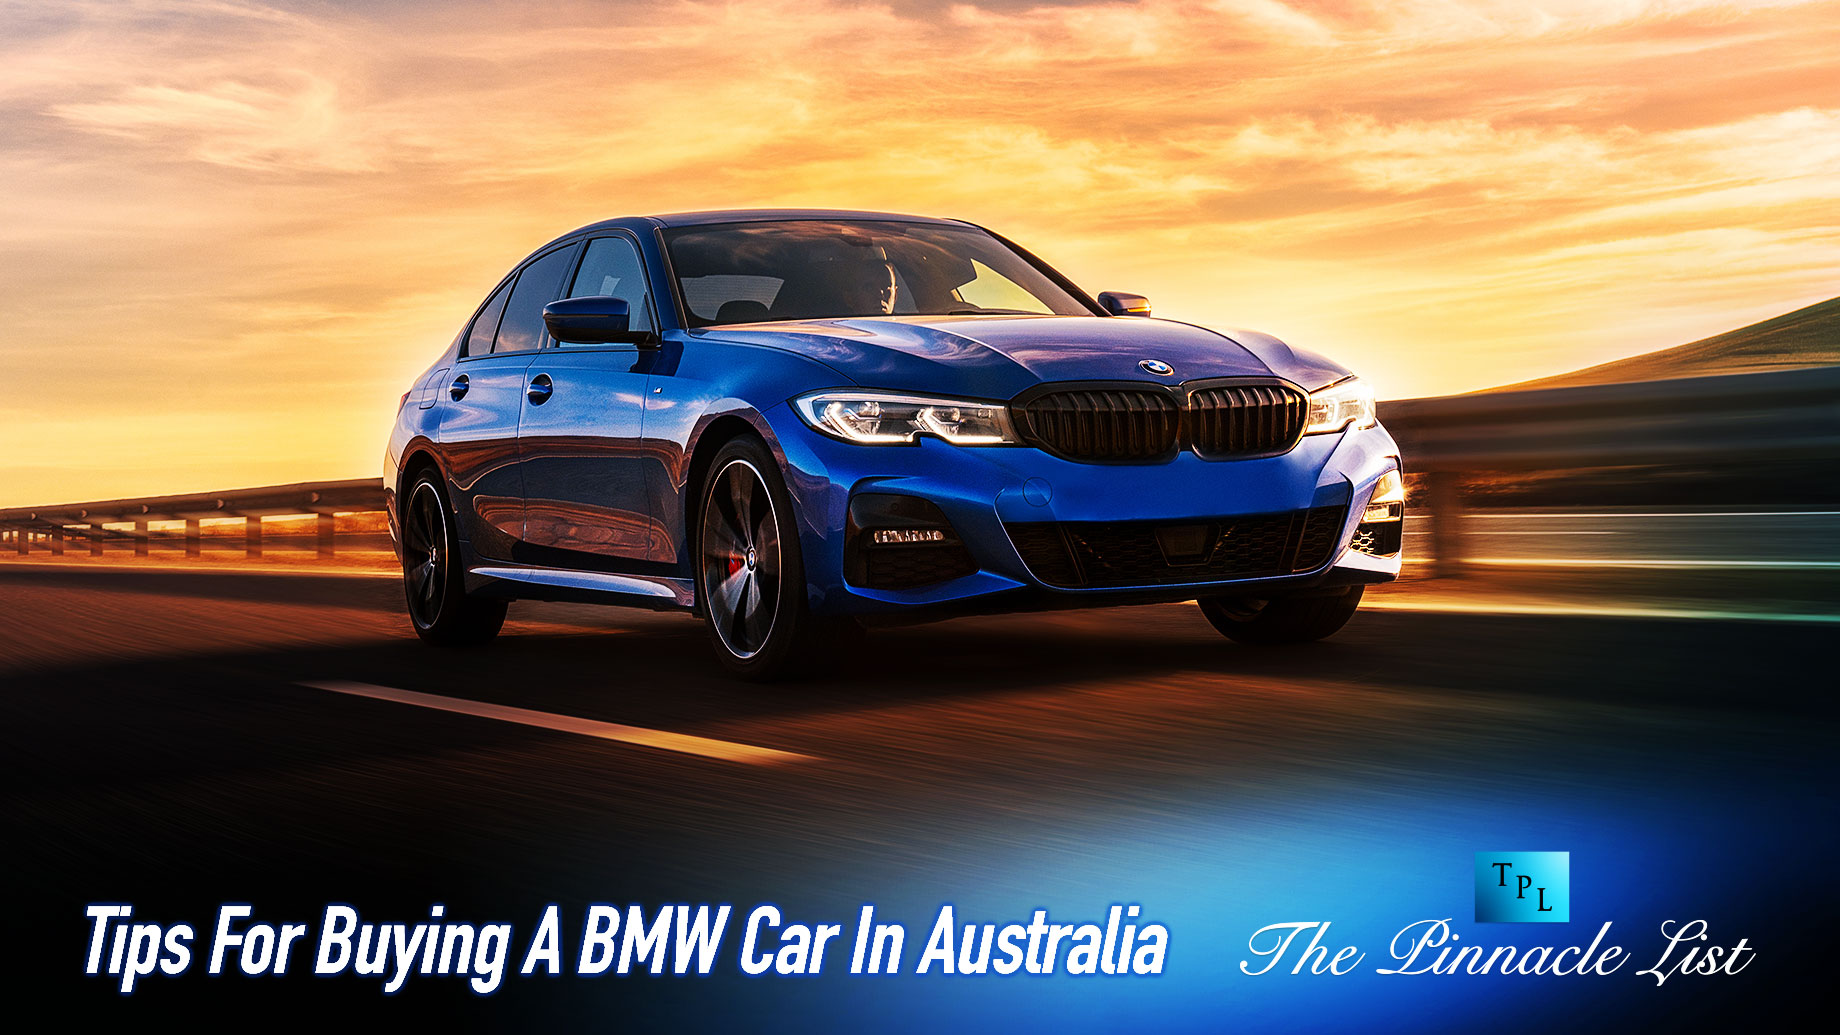 Tips For Buying A BMW Car In Australia